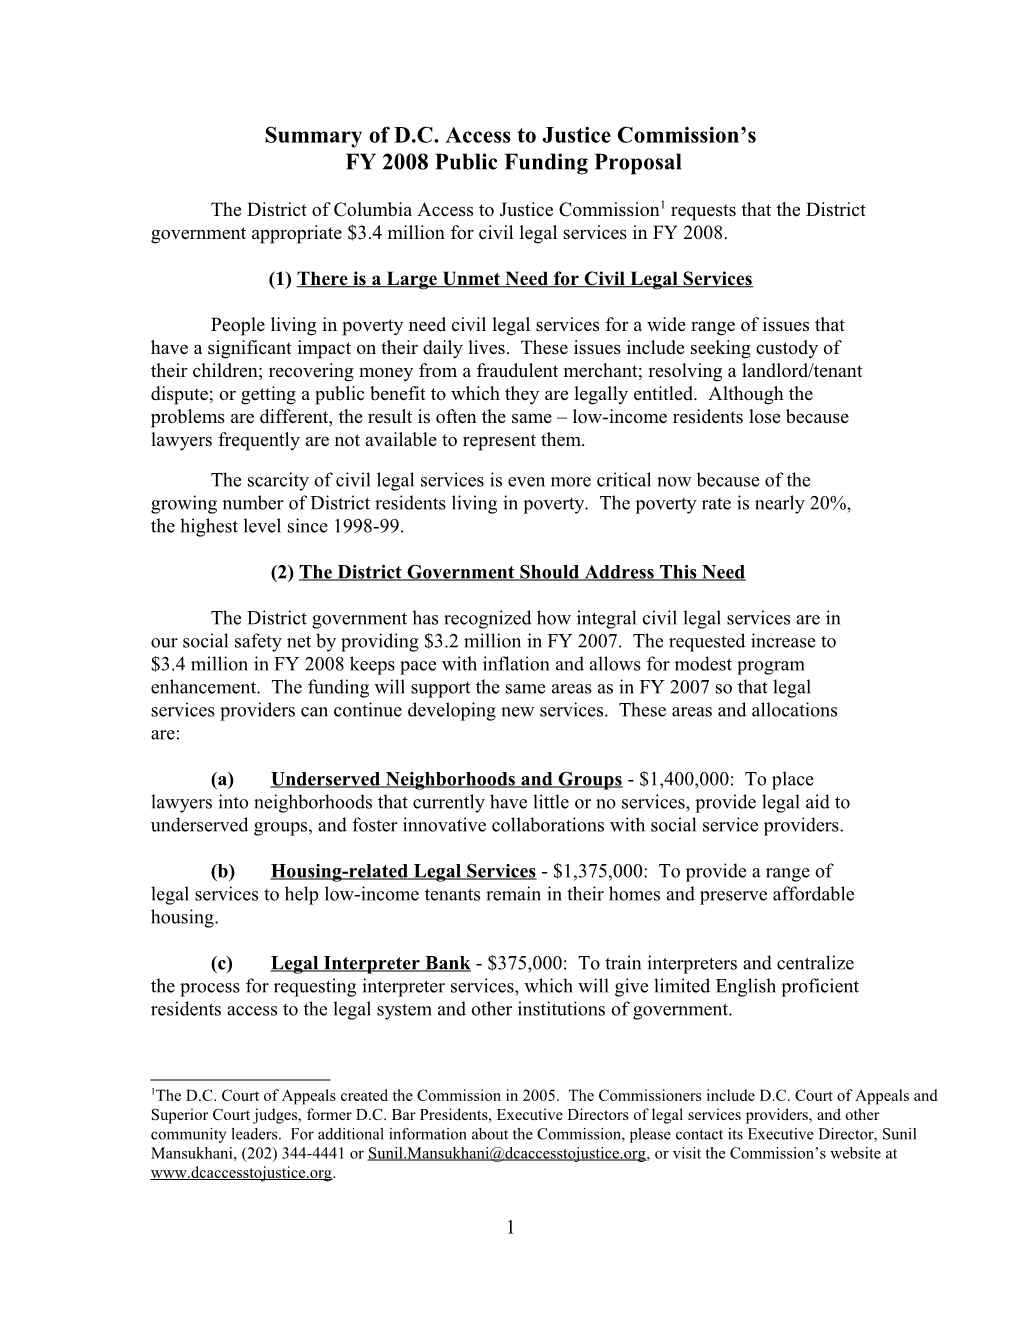 District of Columbia Access to Justice Commission Fiscal Year 2006 Public Funding Proposal